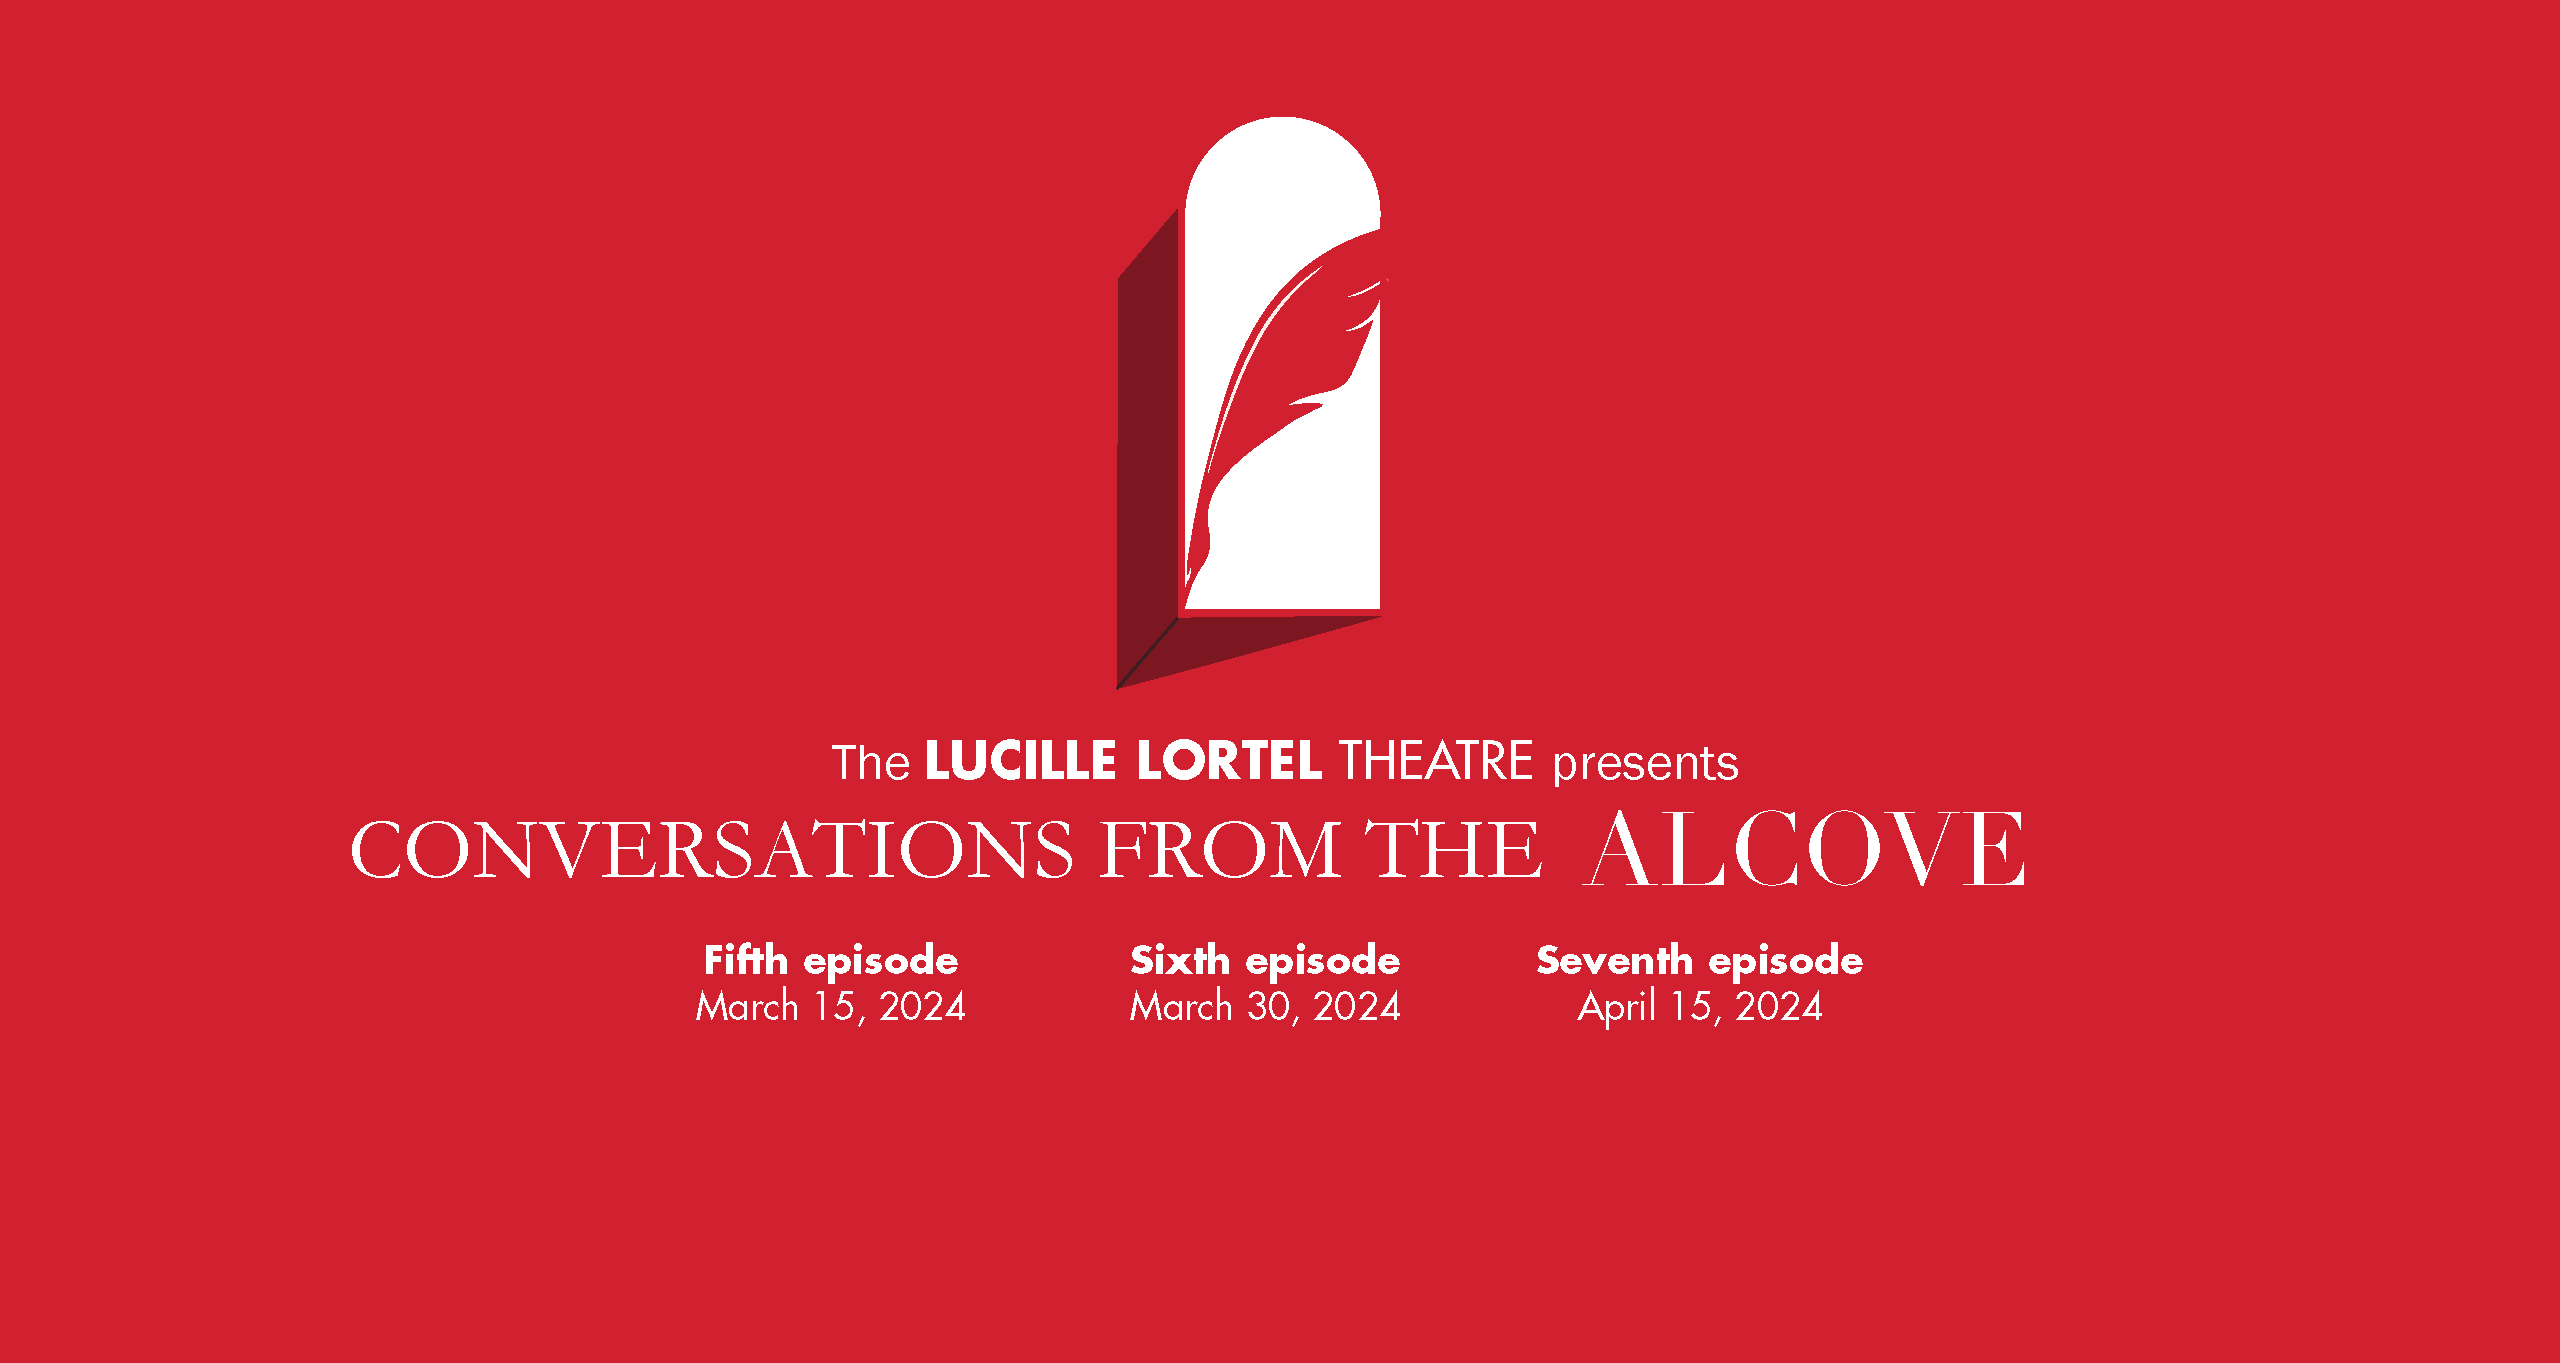 Fifth episode of Conversations at the Alcove releases on March 15th, sixth episode releases on March 30th, and seventh episode releases on April 15th